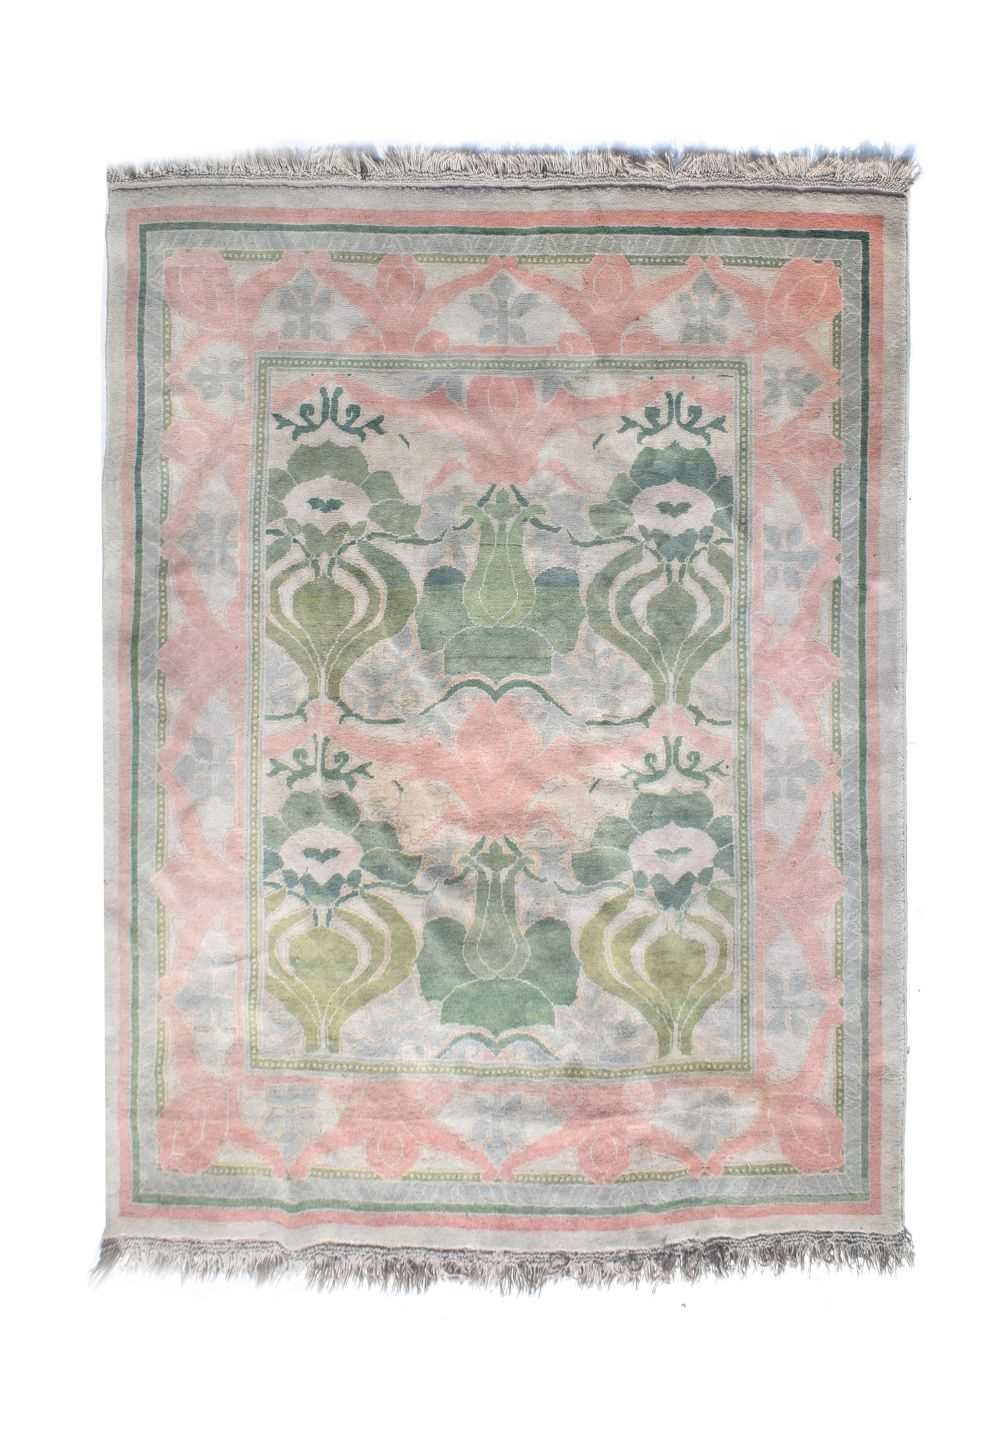 Unusual Art Nouveau-style hand-knotted wool carpet